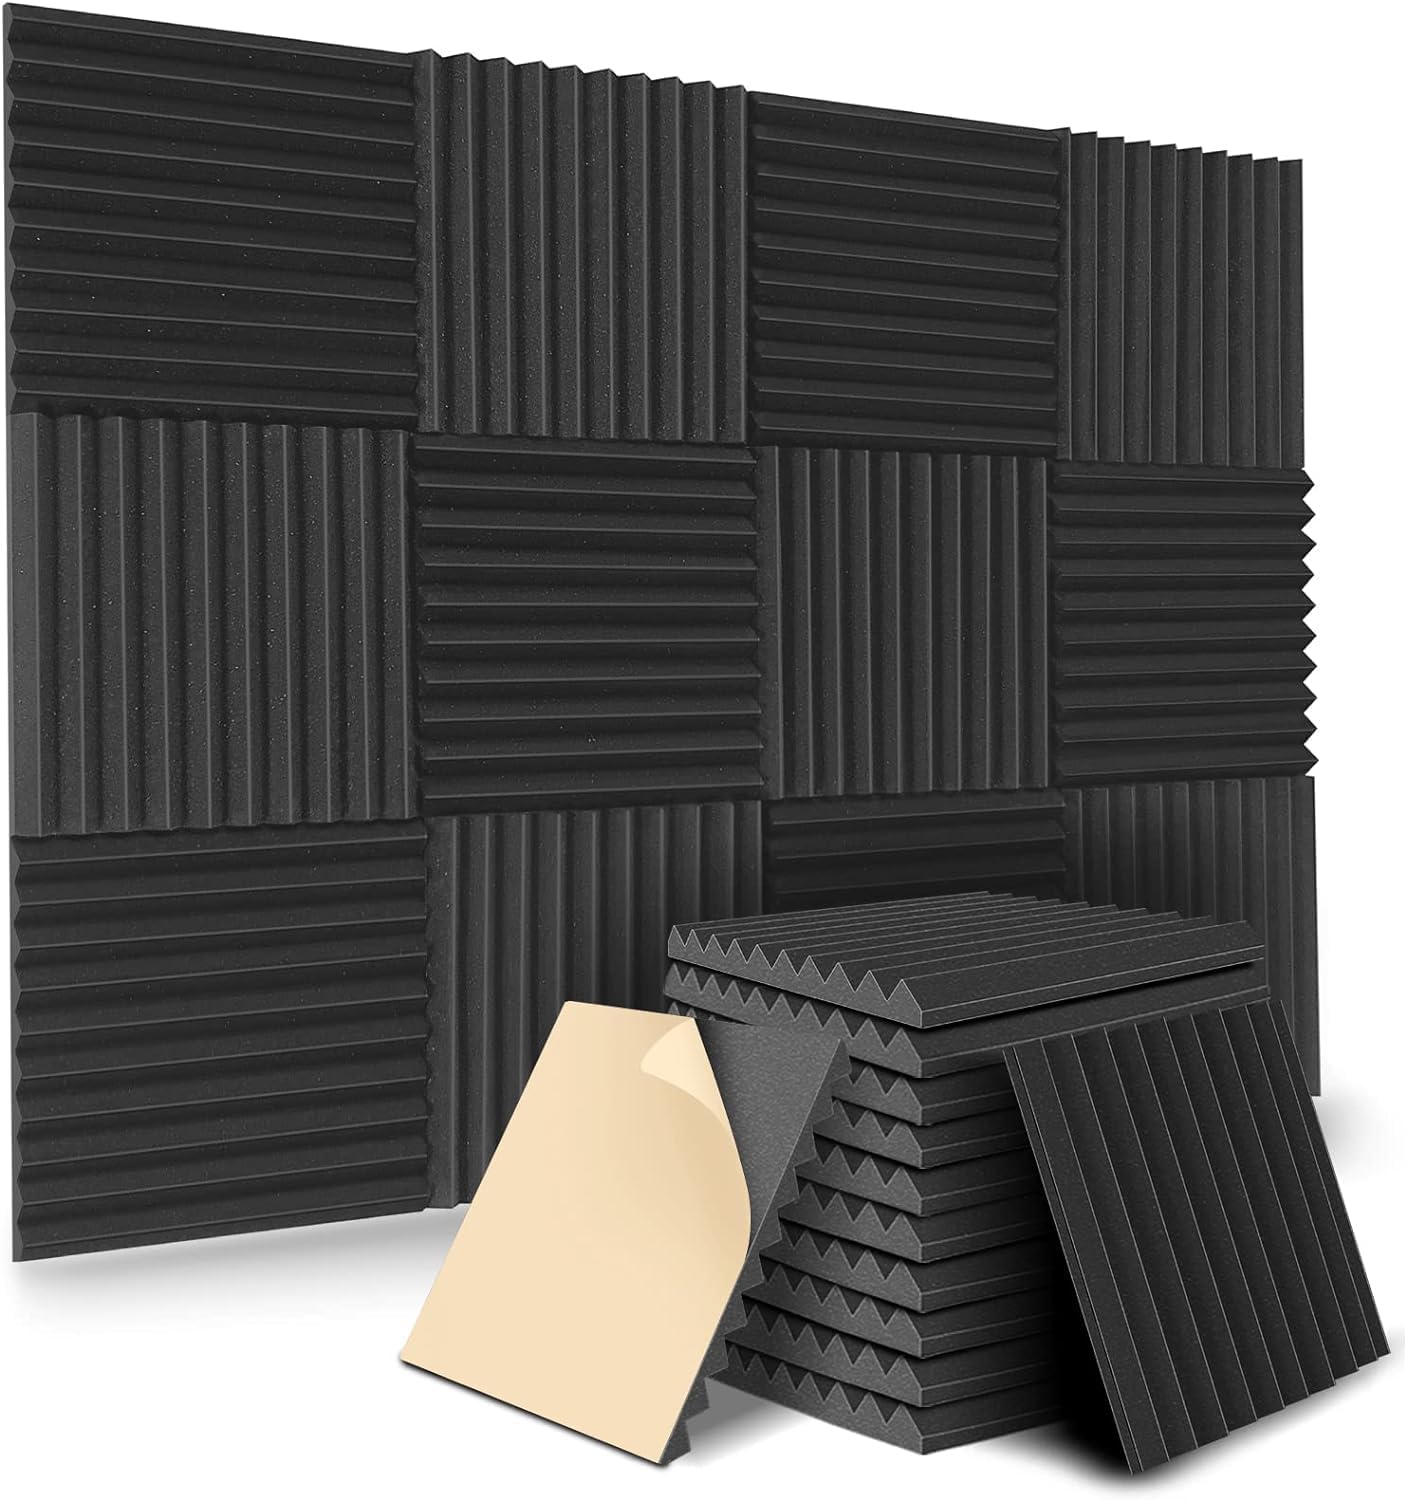 24Packs Black Self-Adhesive Acoustic Foam Sound Insulation Fire Resistant Wall Panels High-density - Office Catch